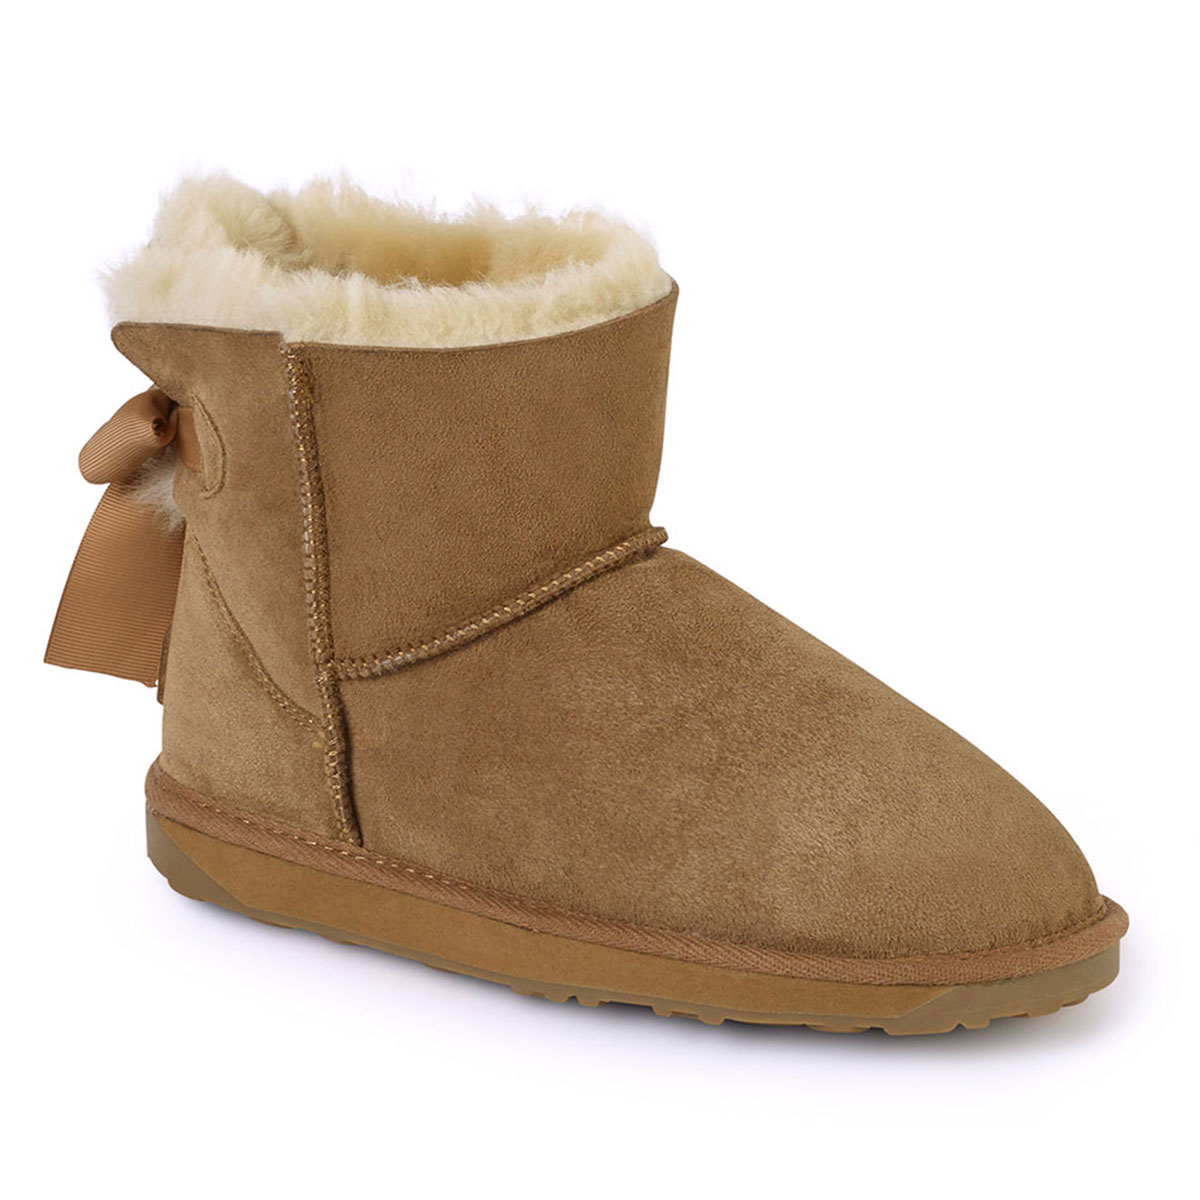 Shoes Stores Near Me: Sheepskin Boots Uk Mens